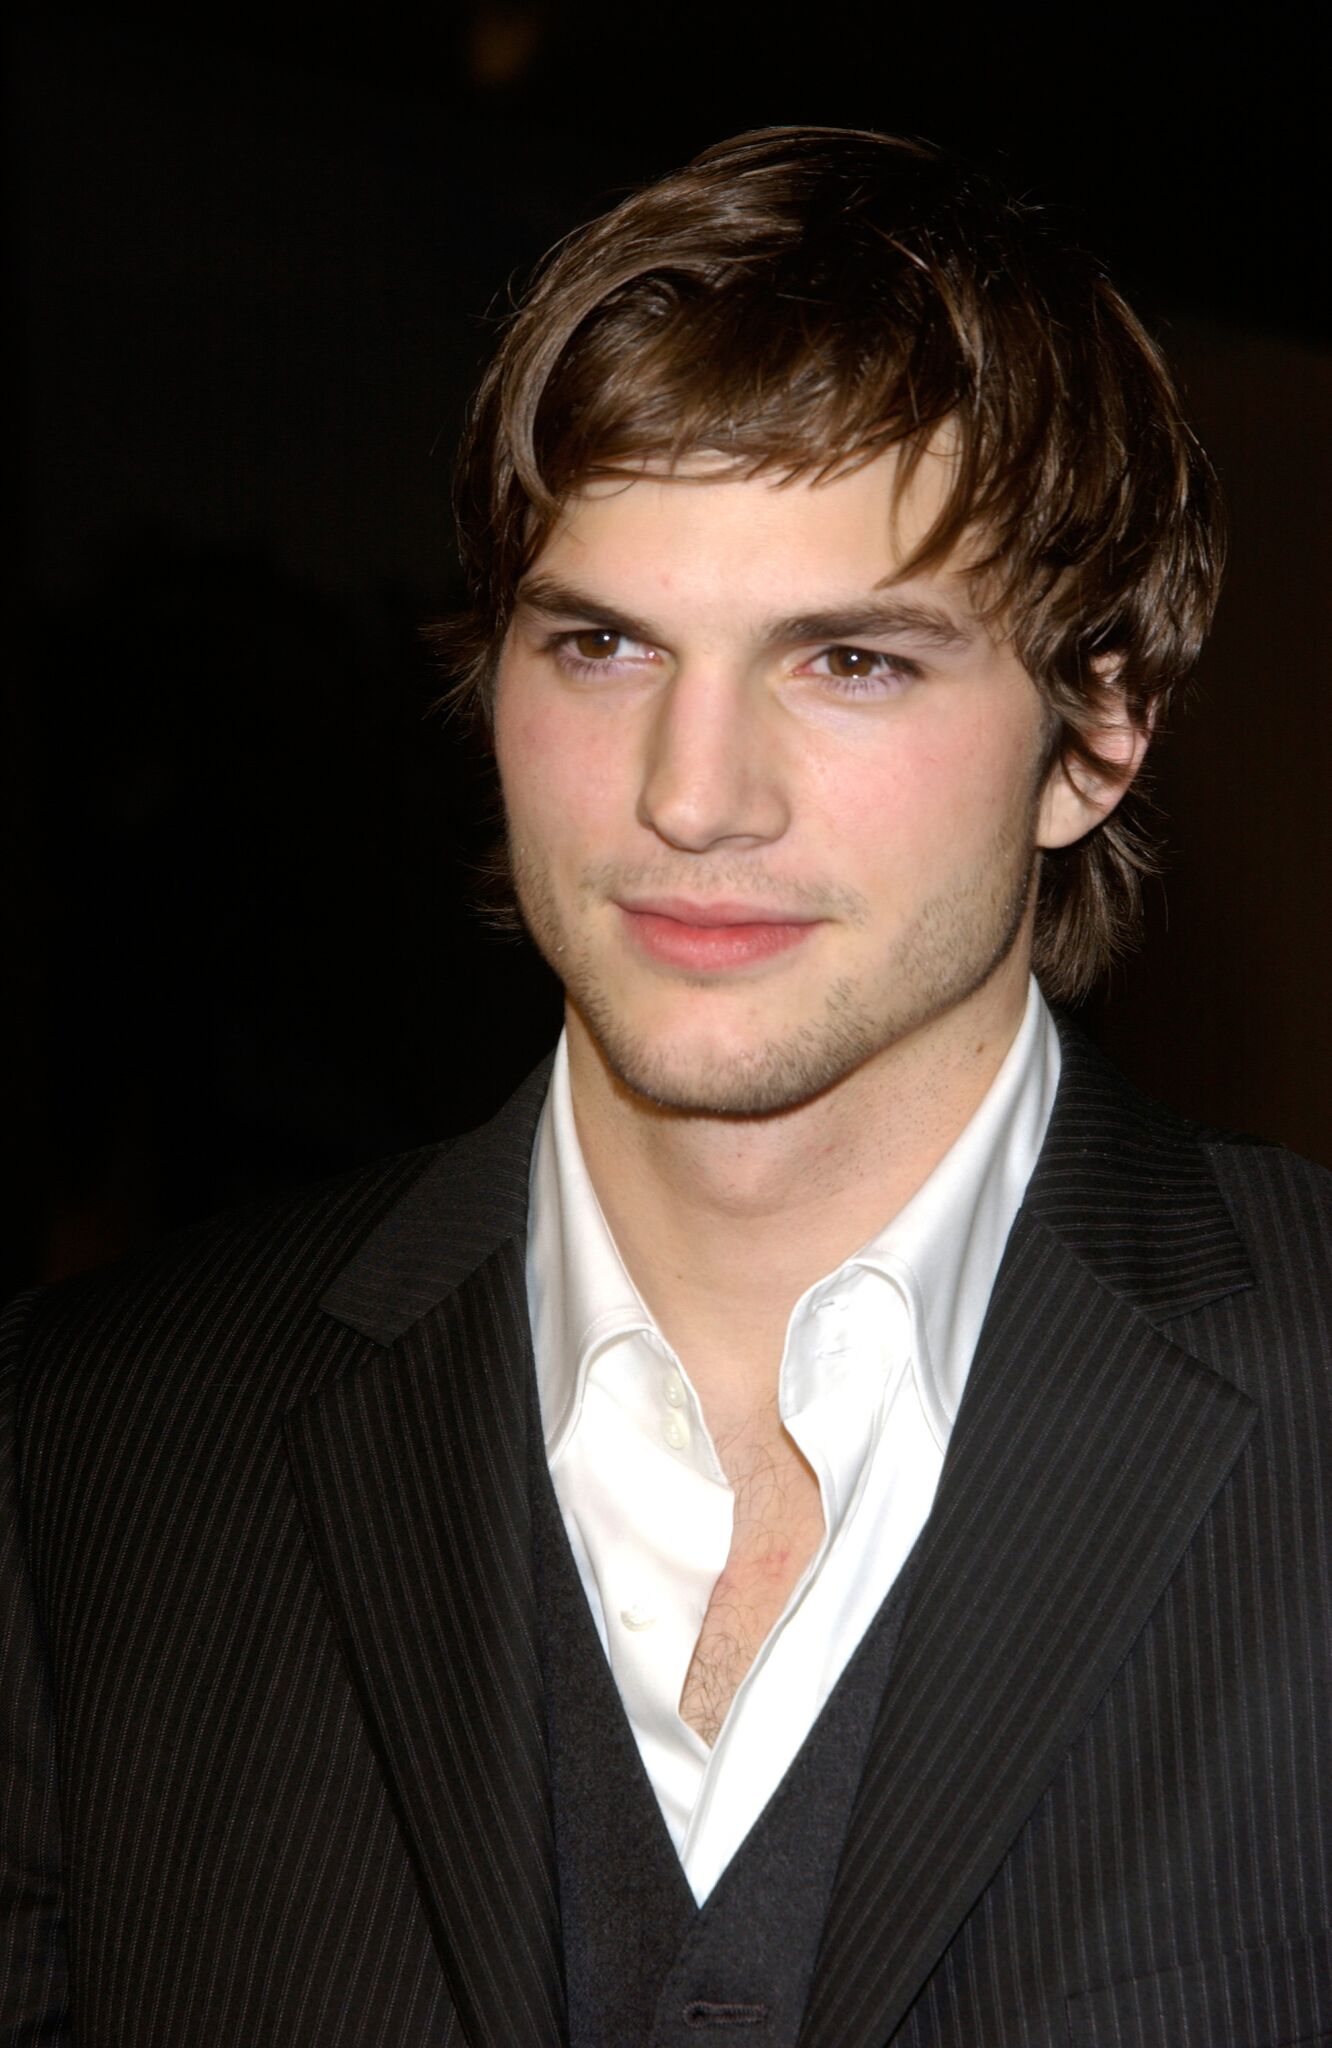 Actor Ashton Kutcher at the Los Angeles premiere of his new movie "Just Married." | Getty Images